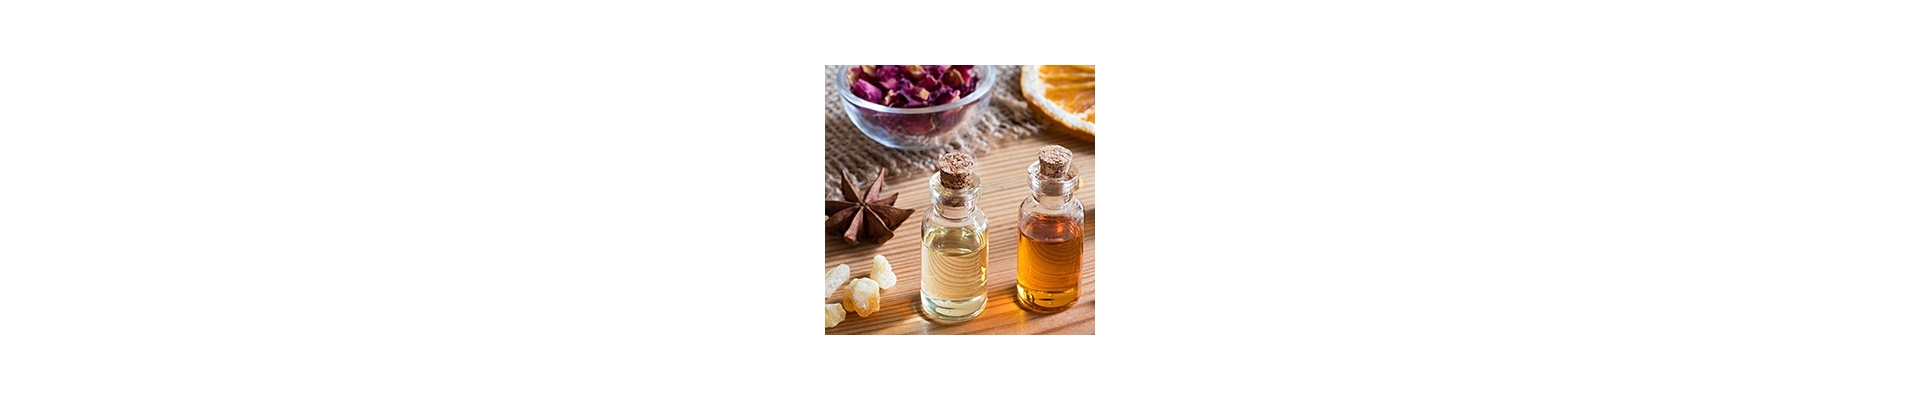 Essential Oils & Extracts for Cosmetics | The Soap Kitchen™